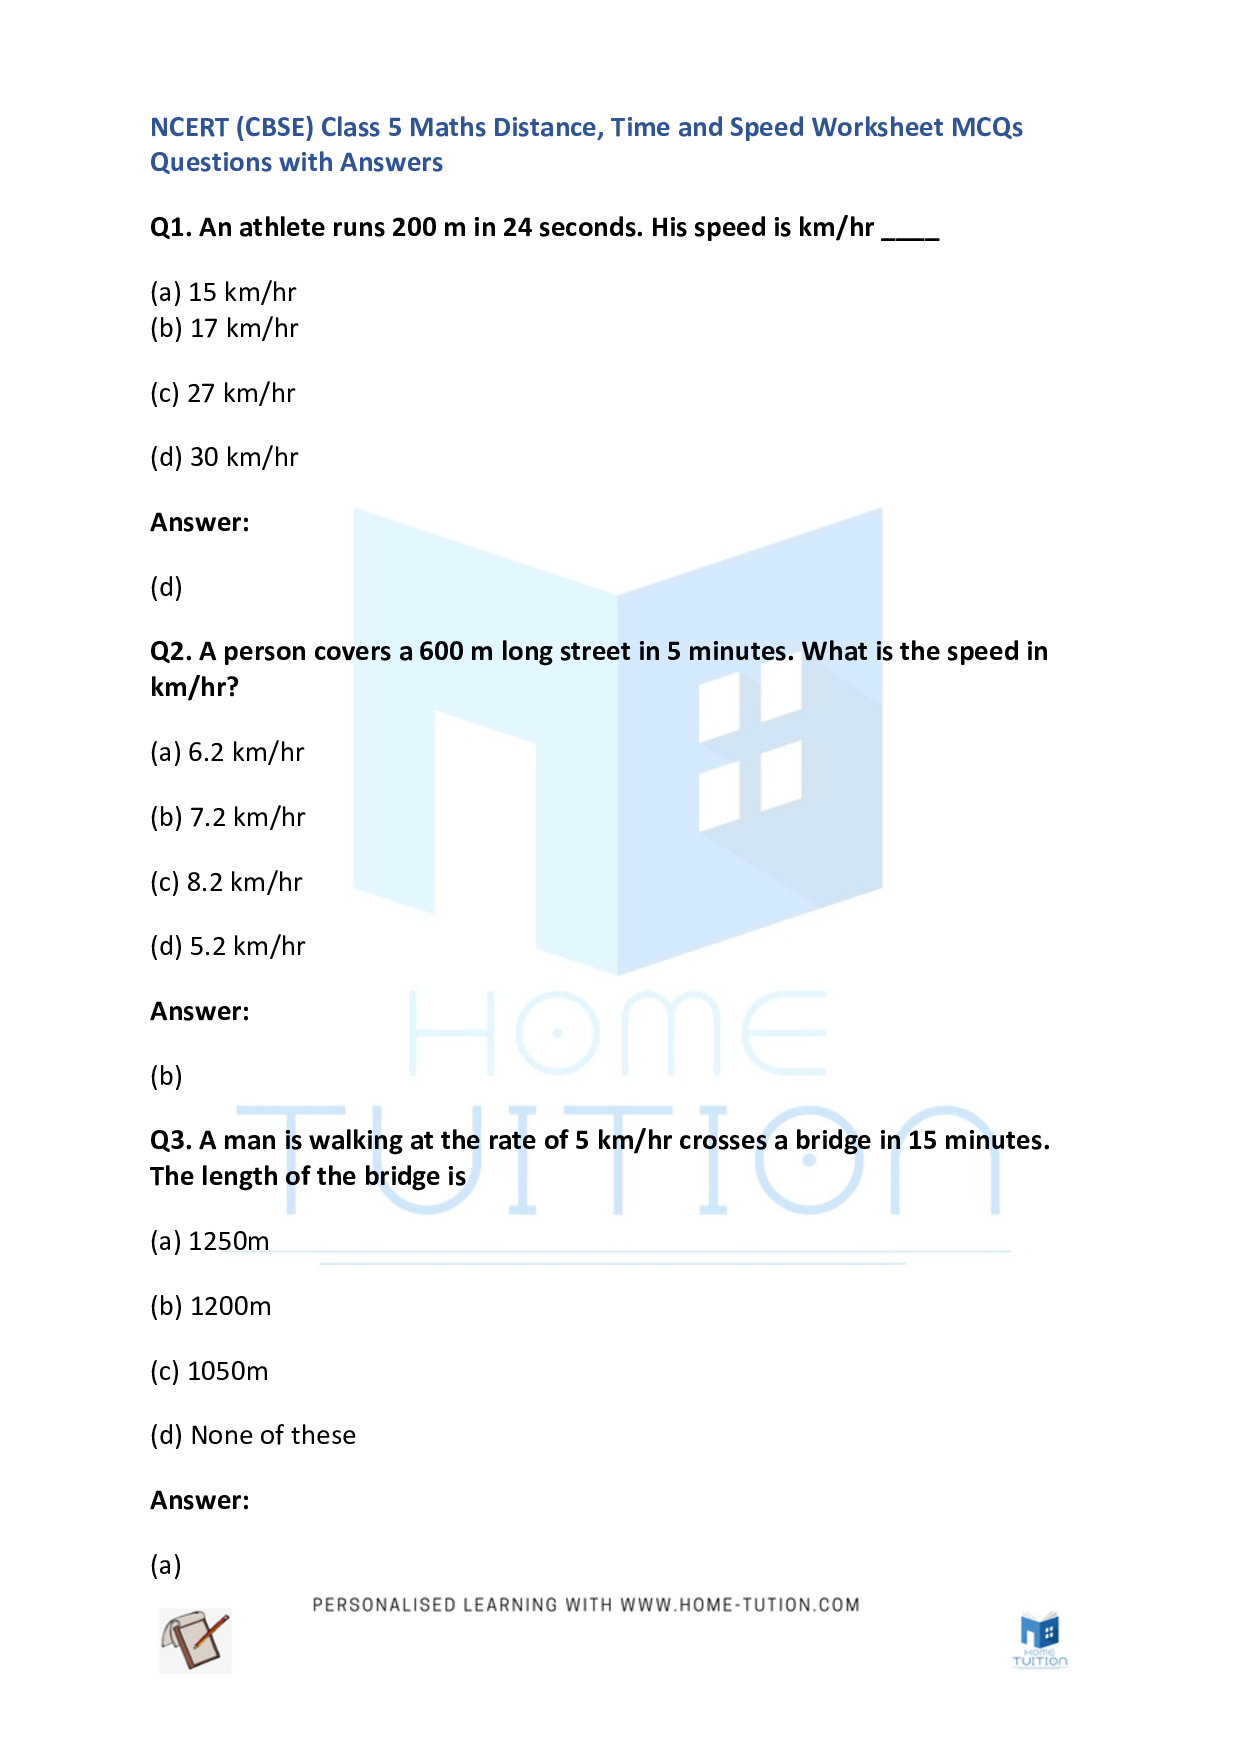 CBSE Class 5 Maths Distance Time and Speed Worksheet with Answers PDF 